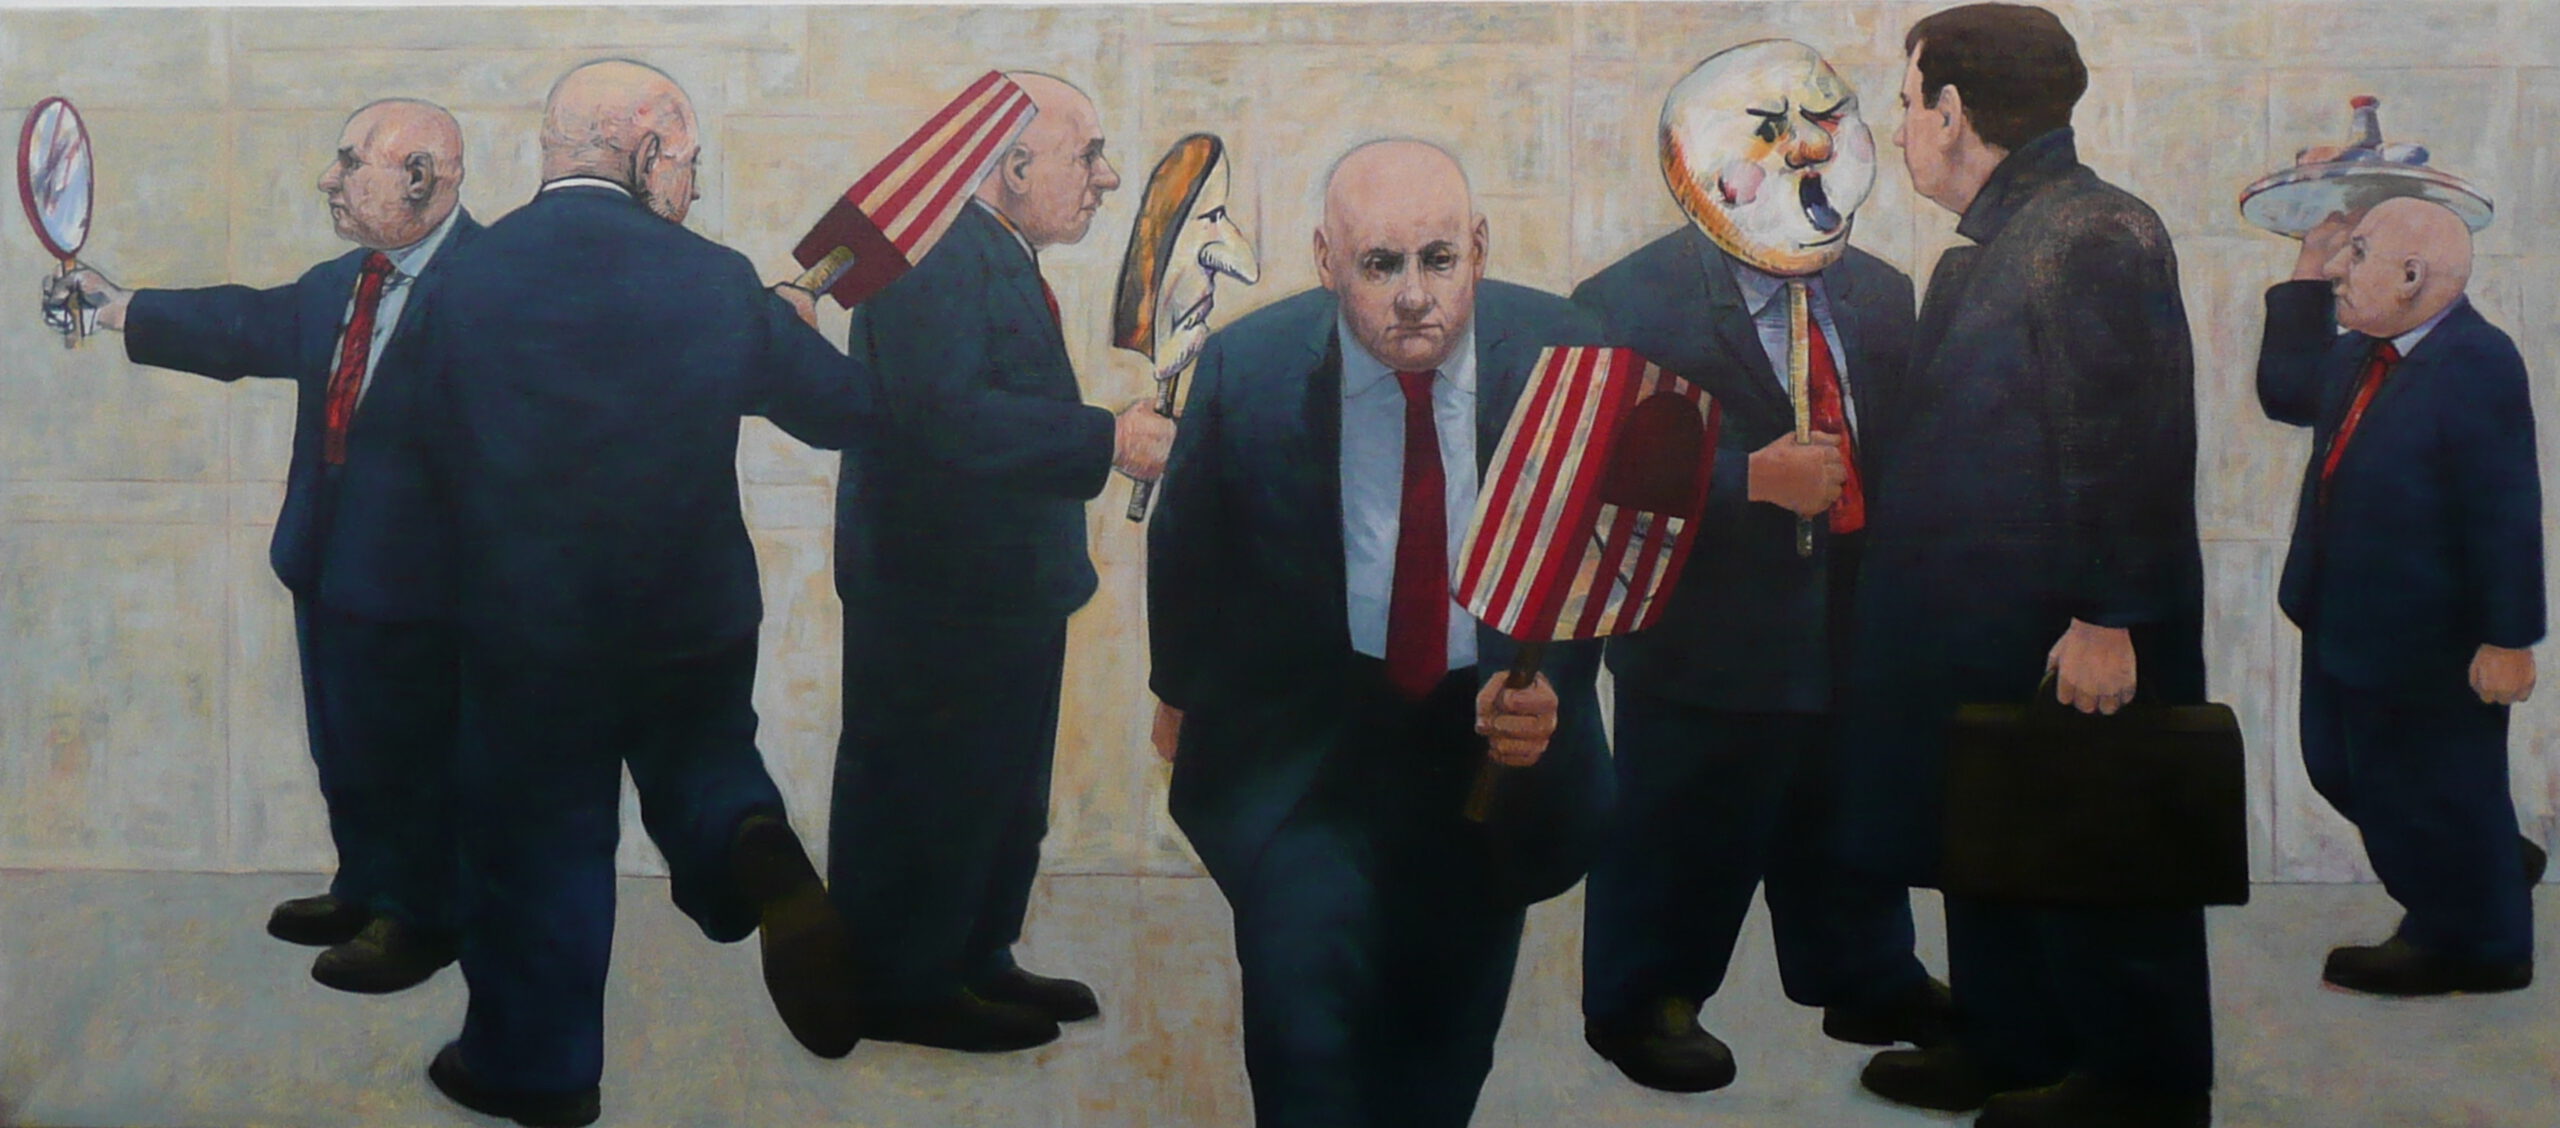 Christopher Orchard 'Proxy' oil on linen 121 x 275cm $40,000